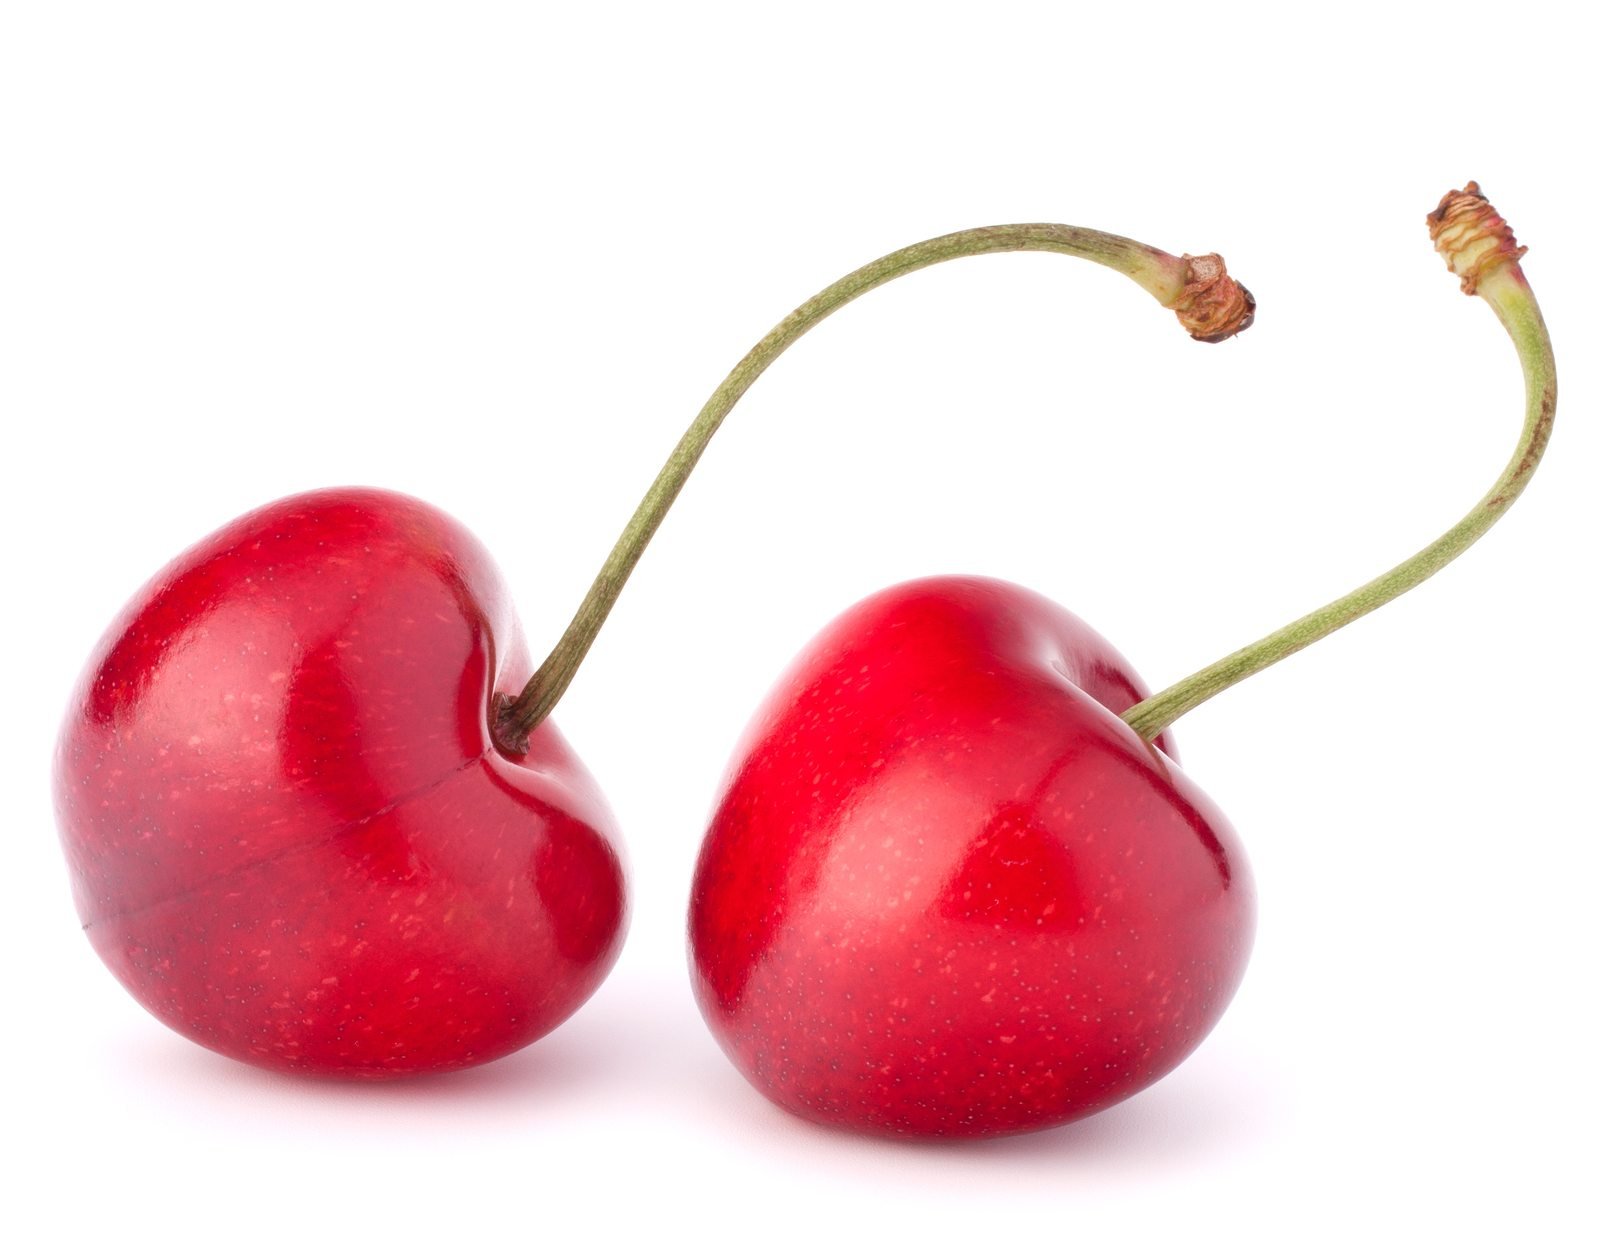 Two heart shaped cherry berries isolated on white background cut